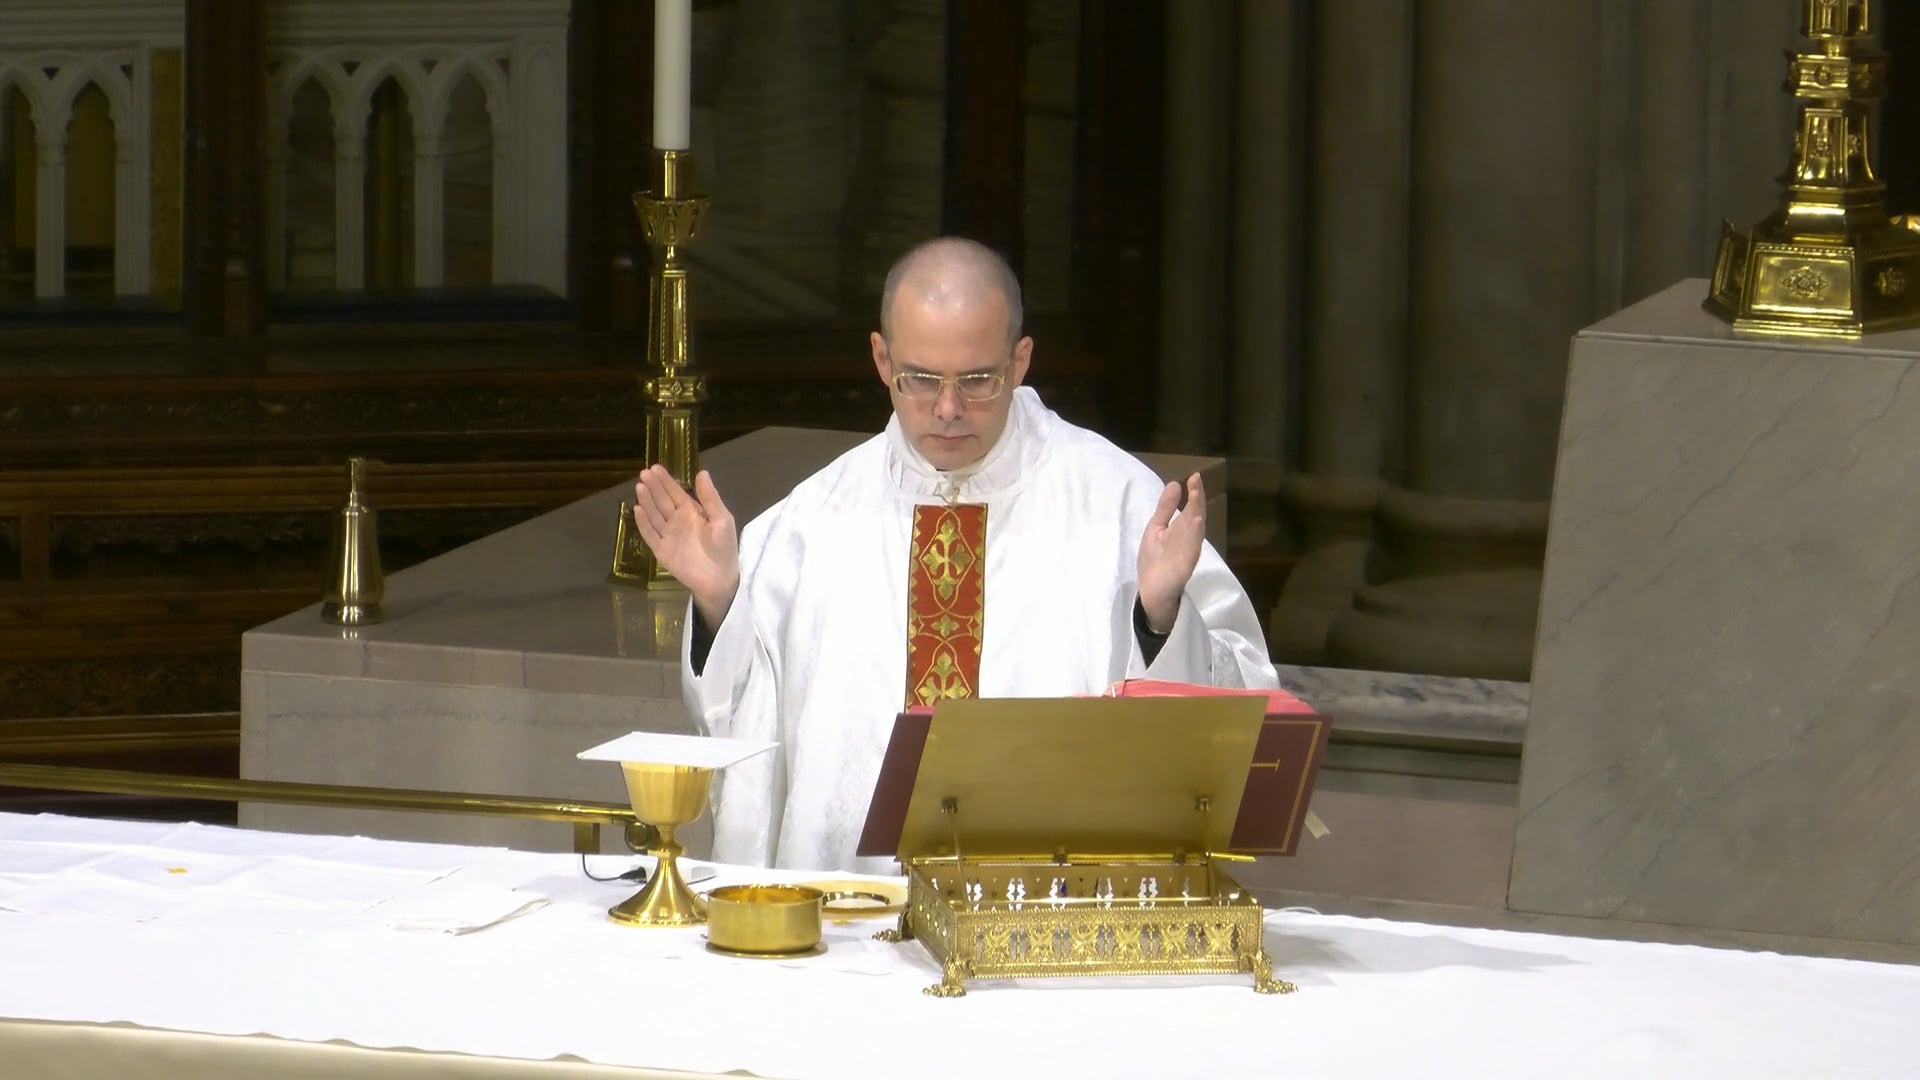 Mass from St. Patrick's Cathedral - October 5, 2022